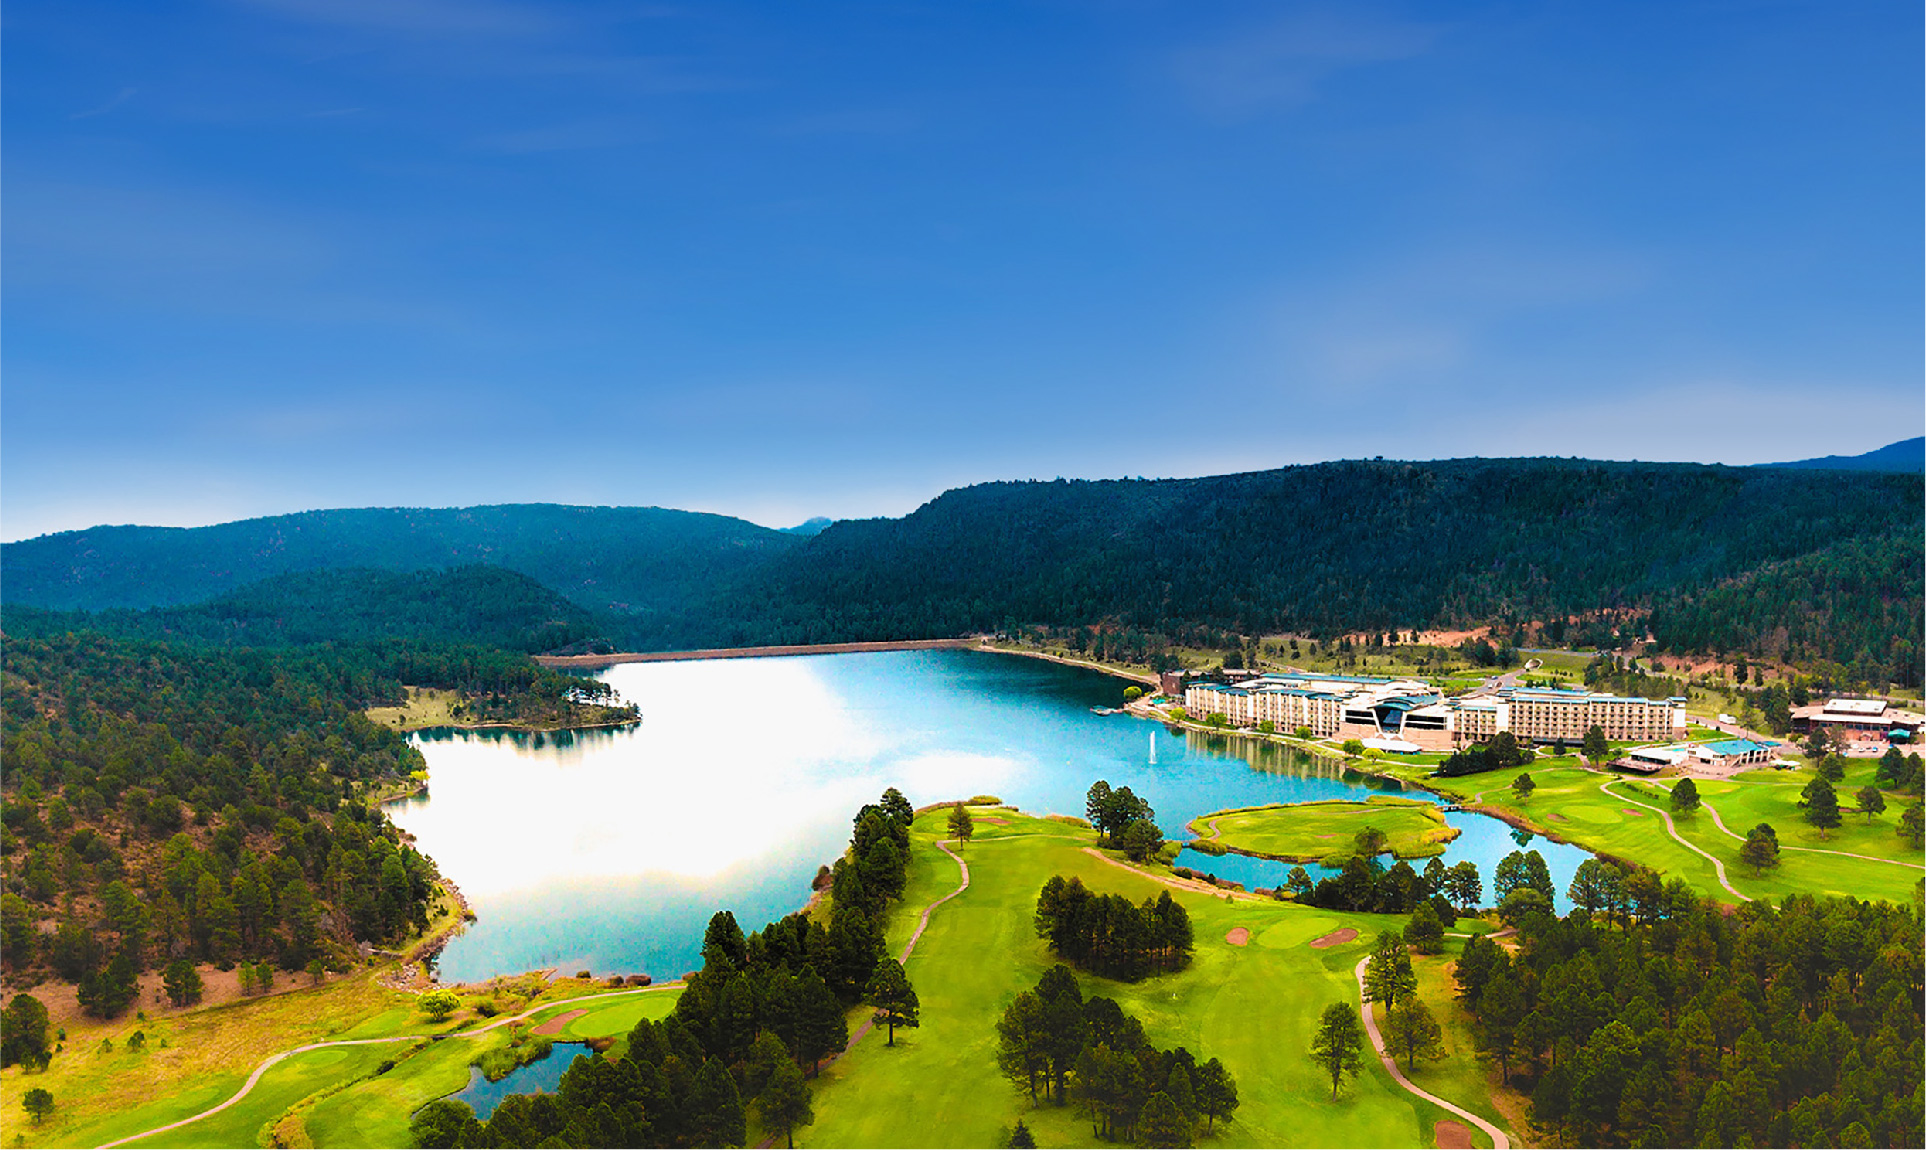 Panoramic view of Lake Mescalero and Inn of the Mountain Gods and Casino.